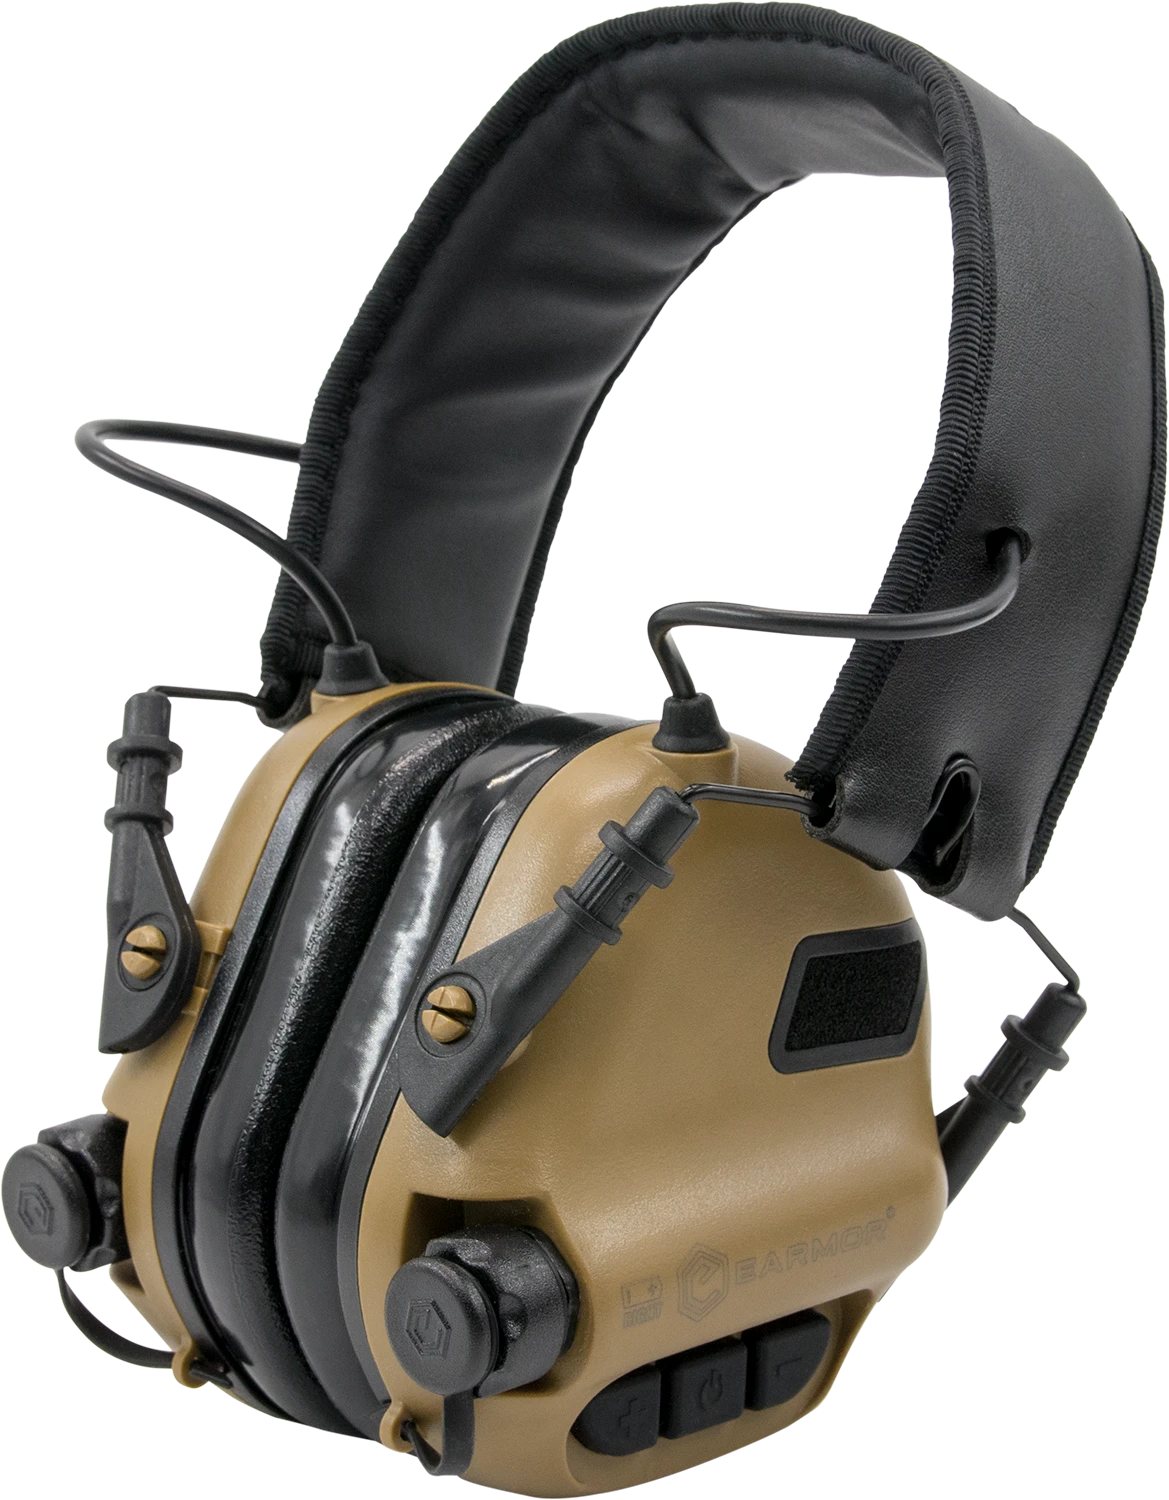 OPSMEN EARMOR M31 IPX5 Slim Low Profile Electronic Hearing Protector Range Shooting Hunting  Earmuff with AUX Input NRR22